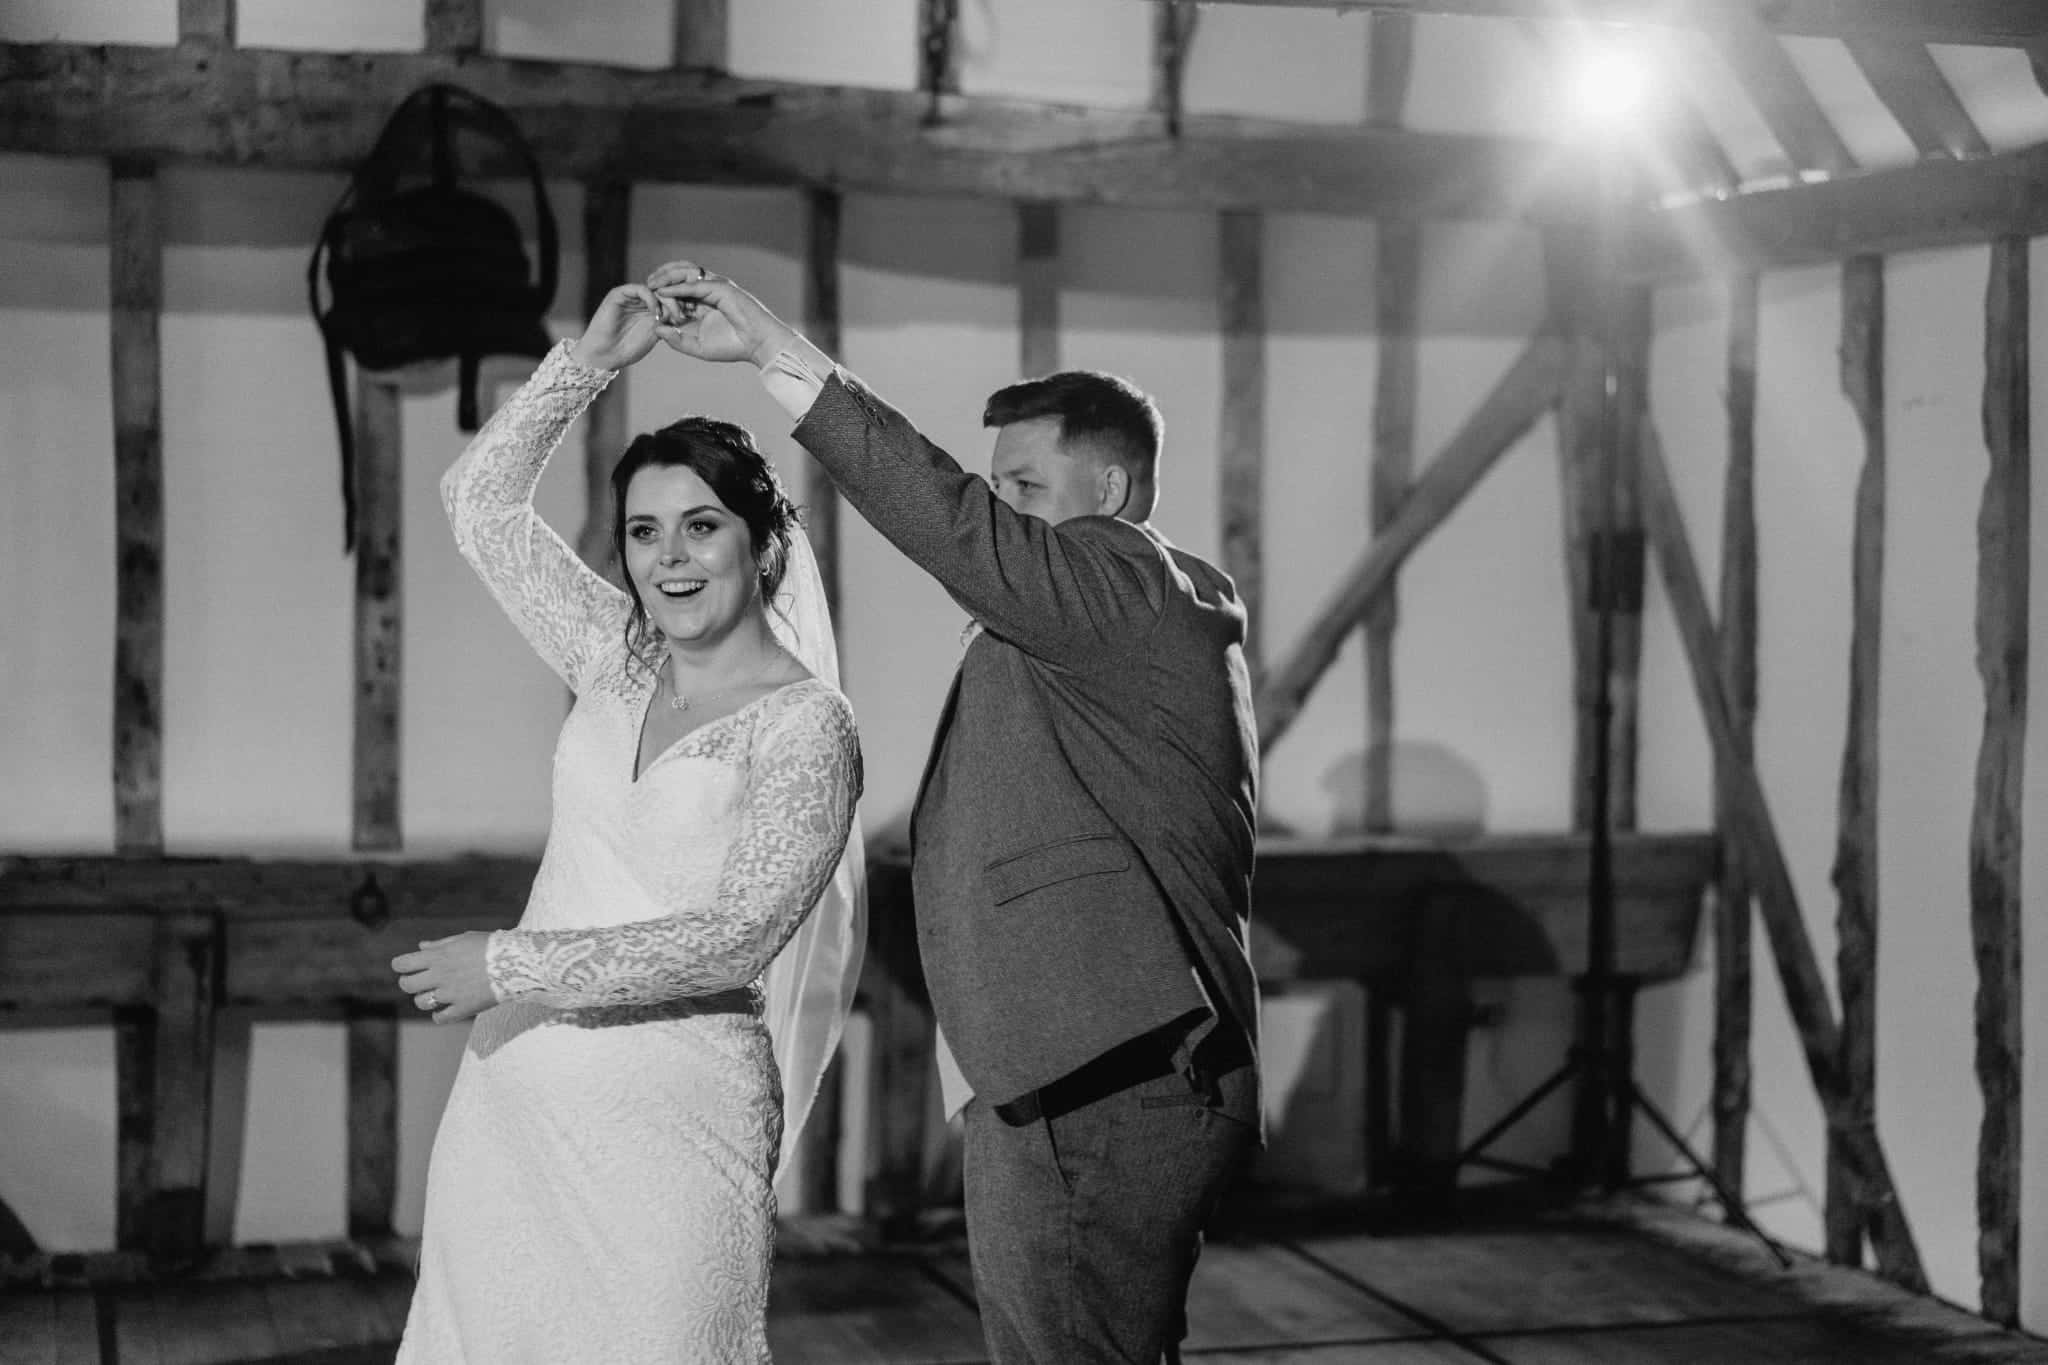 Black and White photo of Bride and Groom having their first dance at Barn Wedding Venue